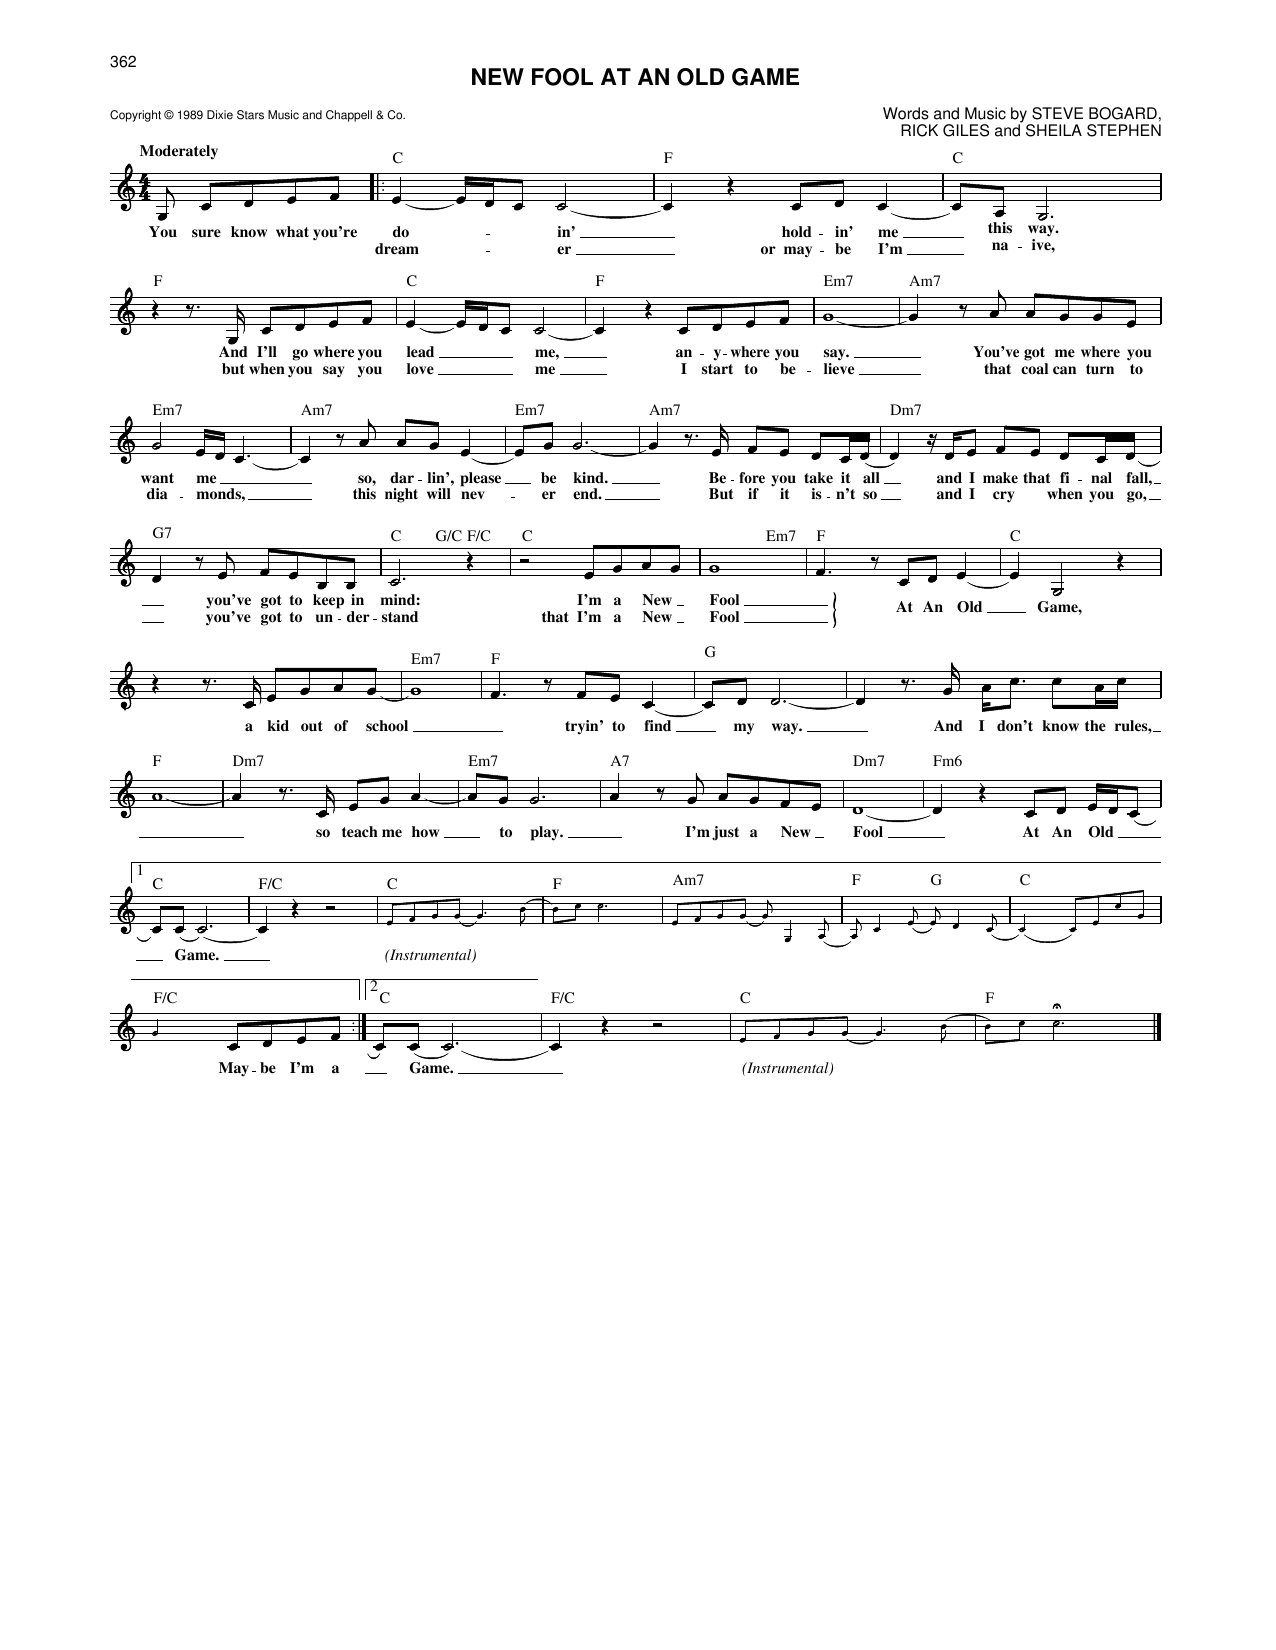 Reba McEntire "New Fool At An Old Game" Sheet Music Notes Download